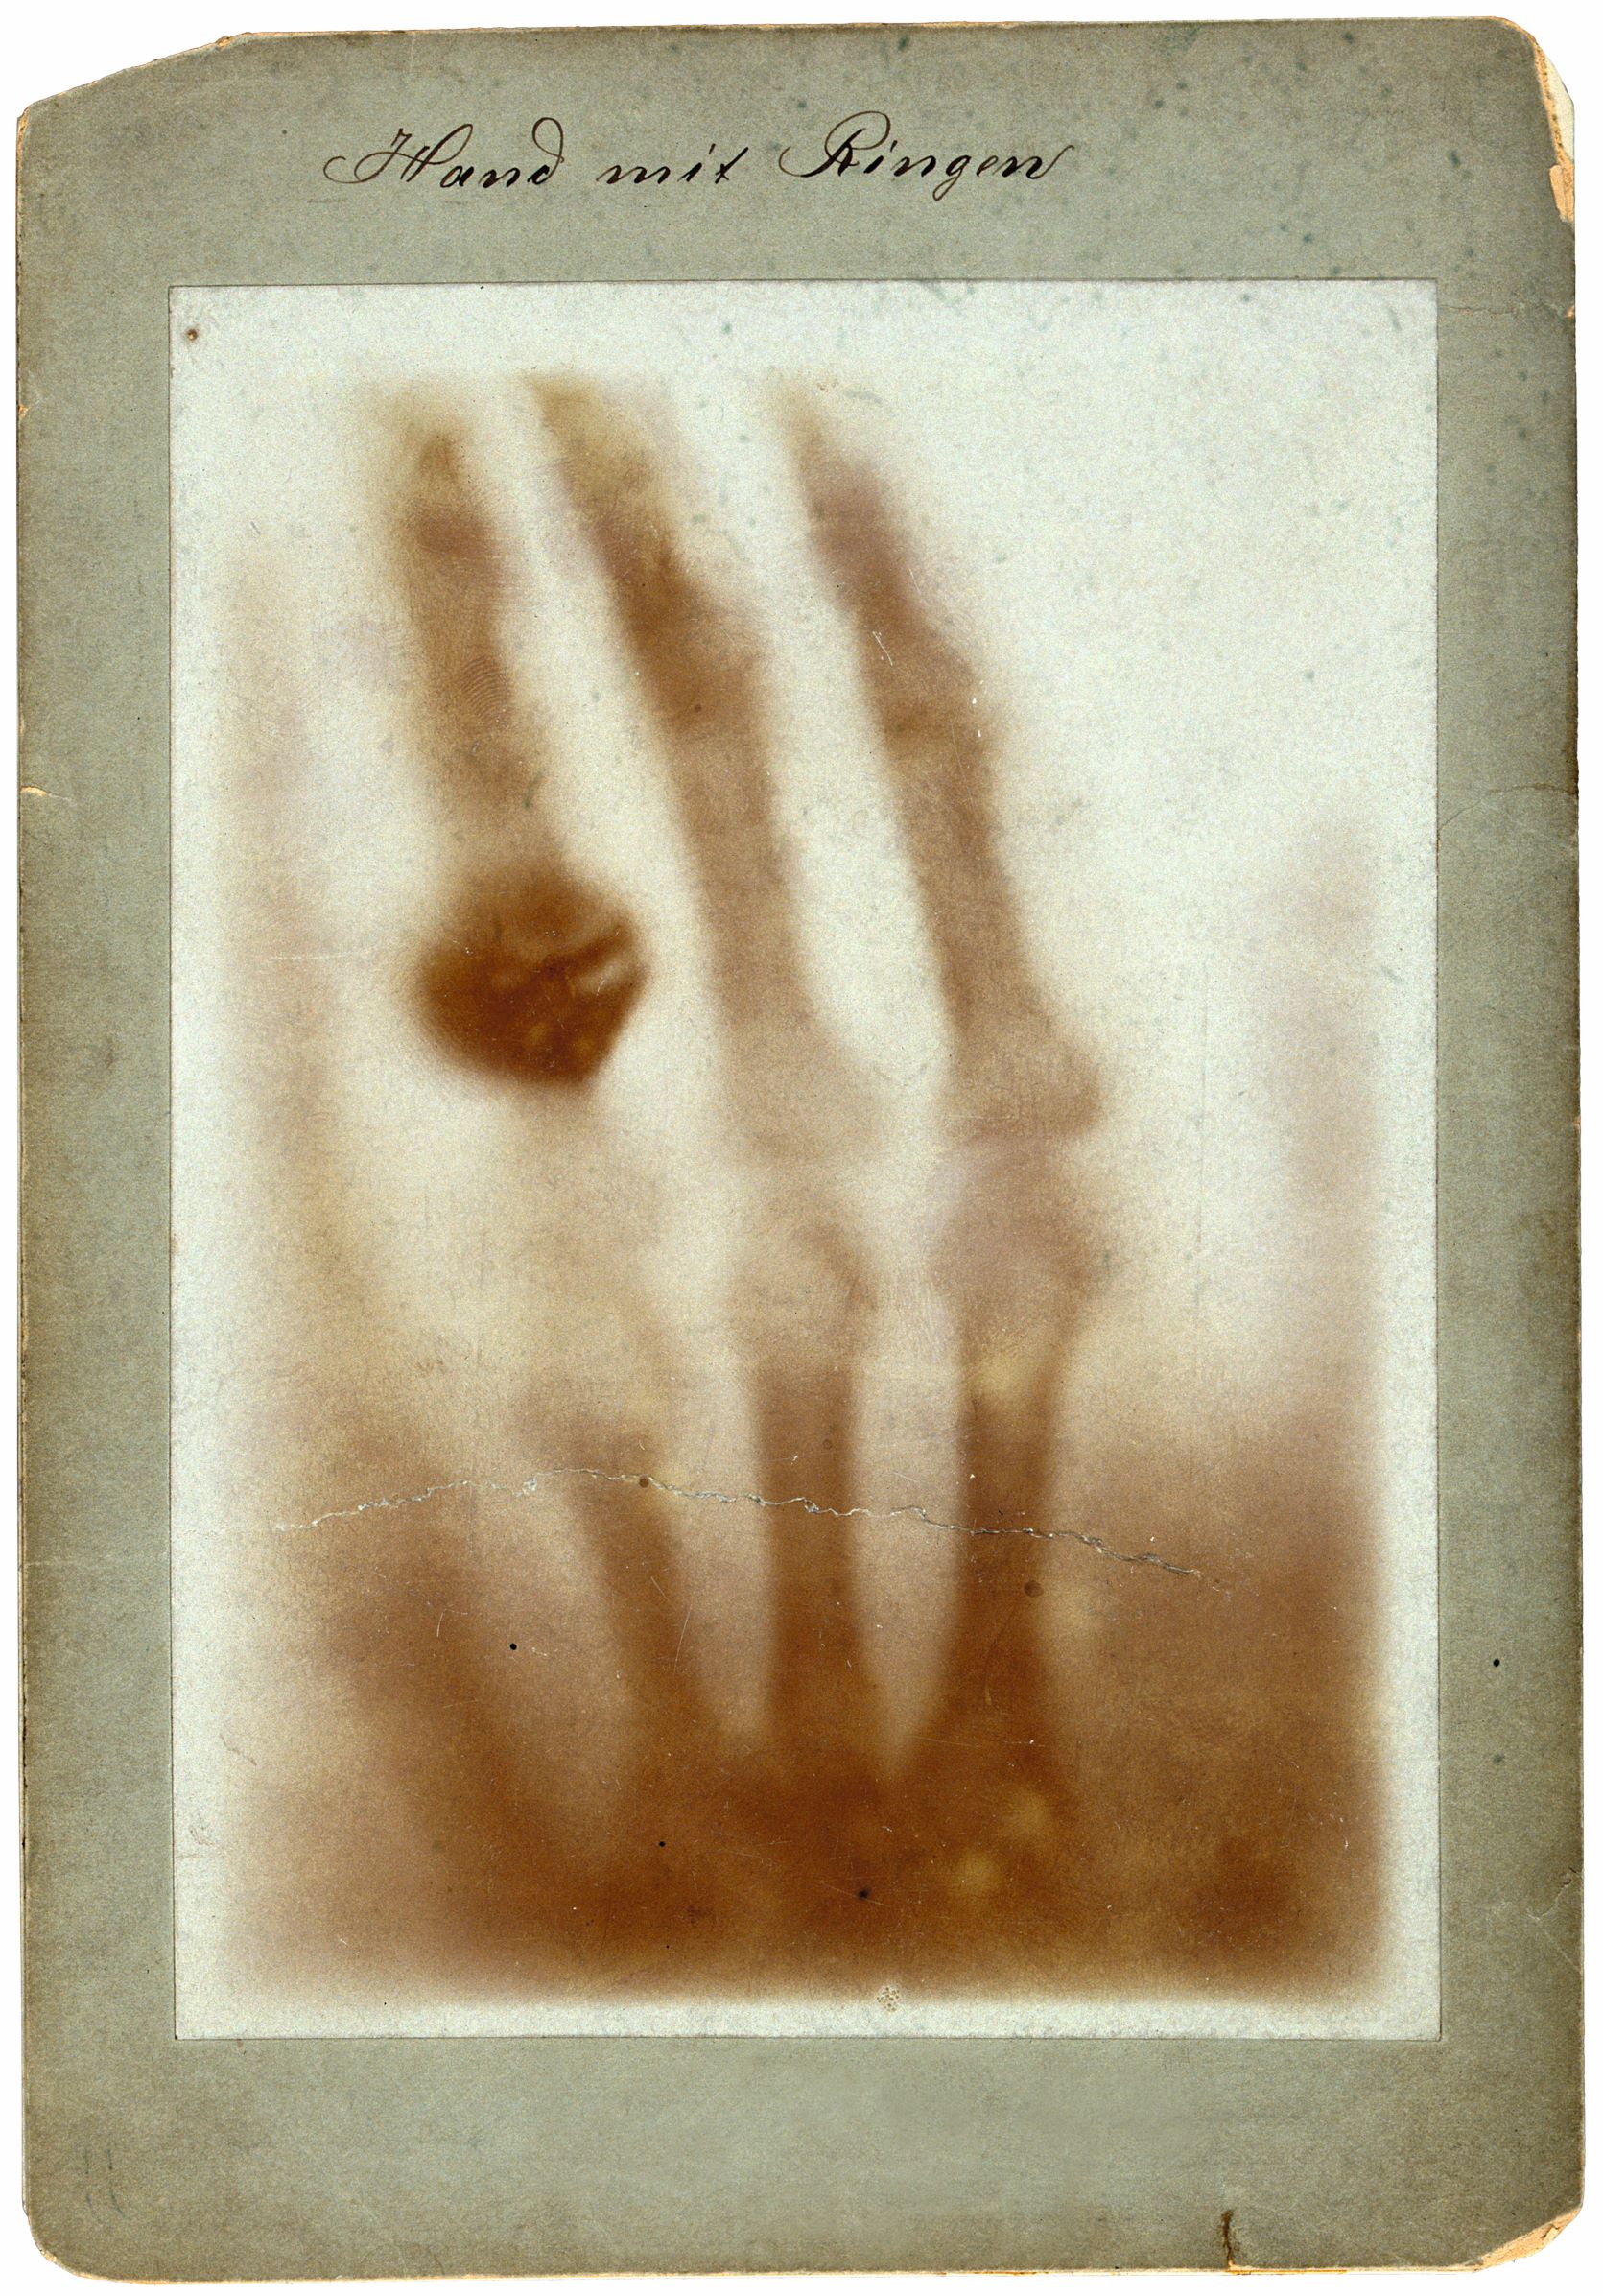 Hand with Rings, 1895, by Wilhelm Conrad Röntgen. As reproduced in Anatomy: Exploring the Human Body